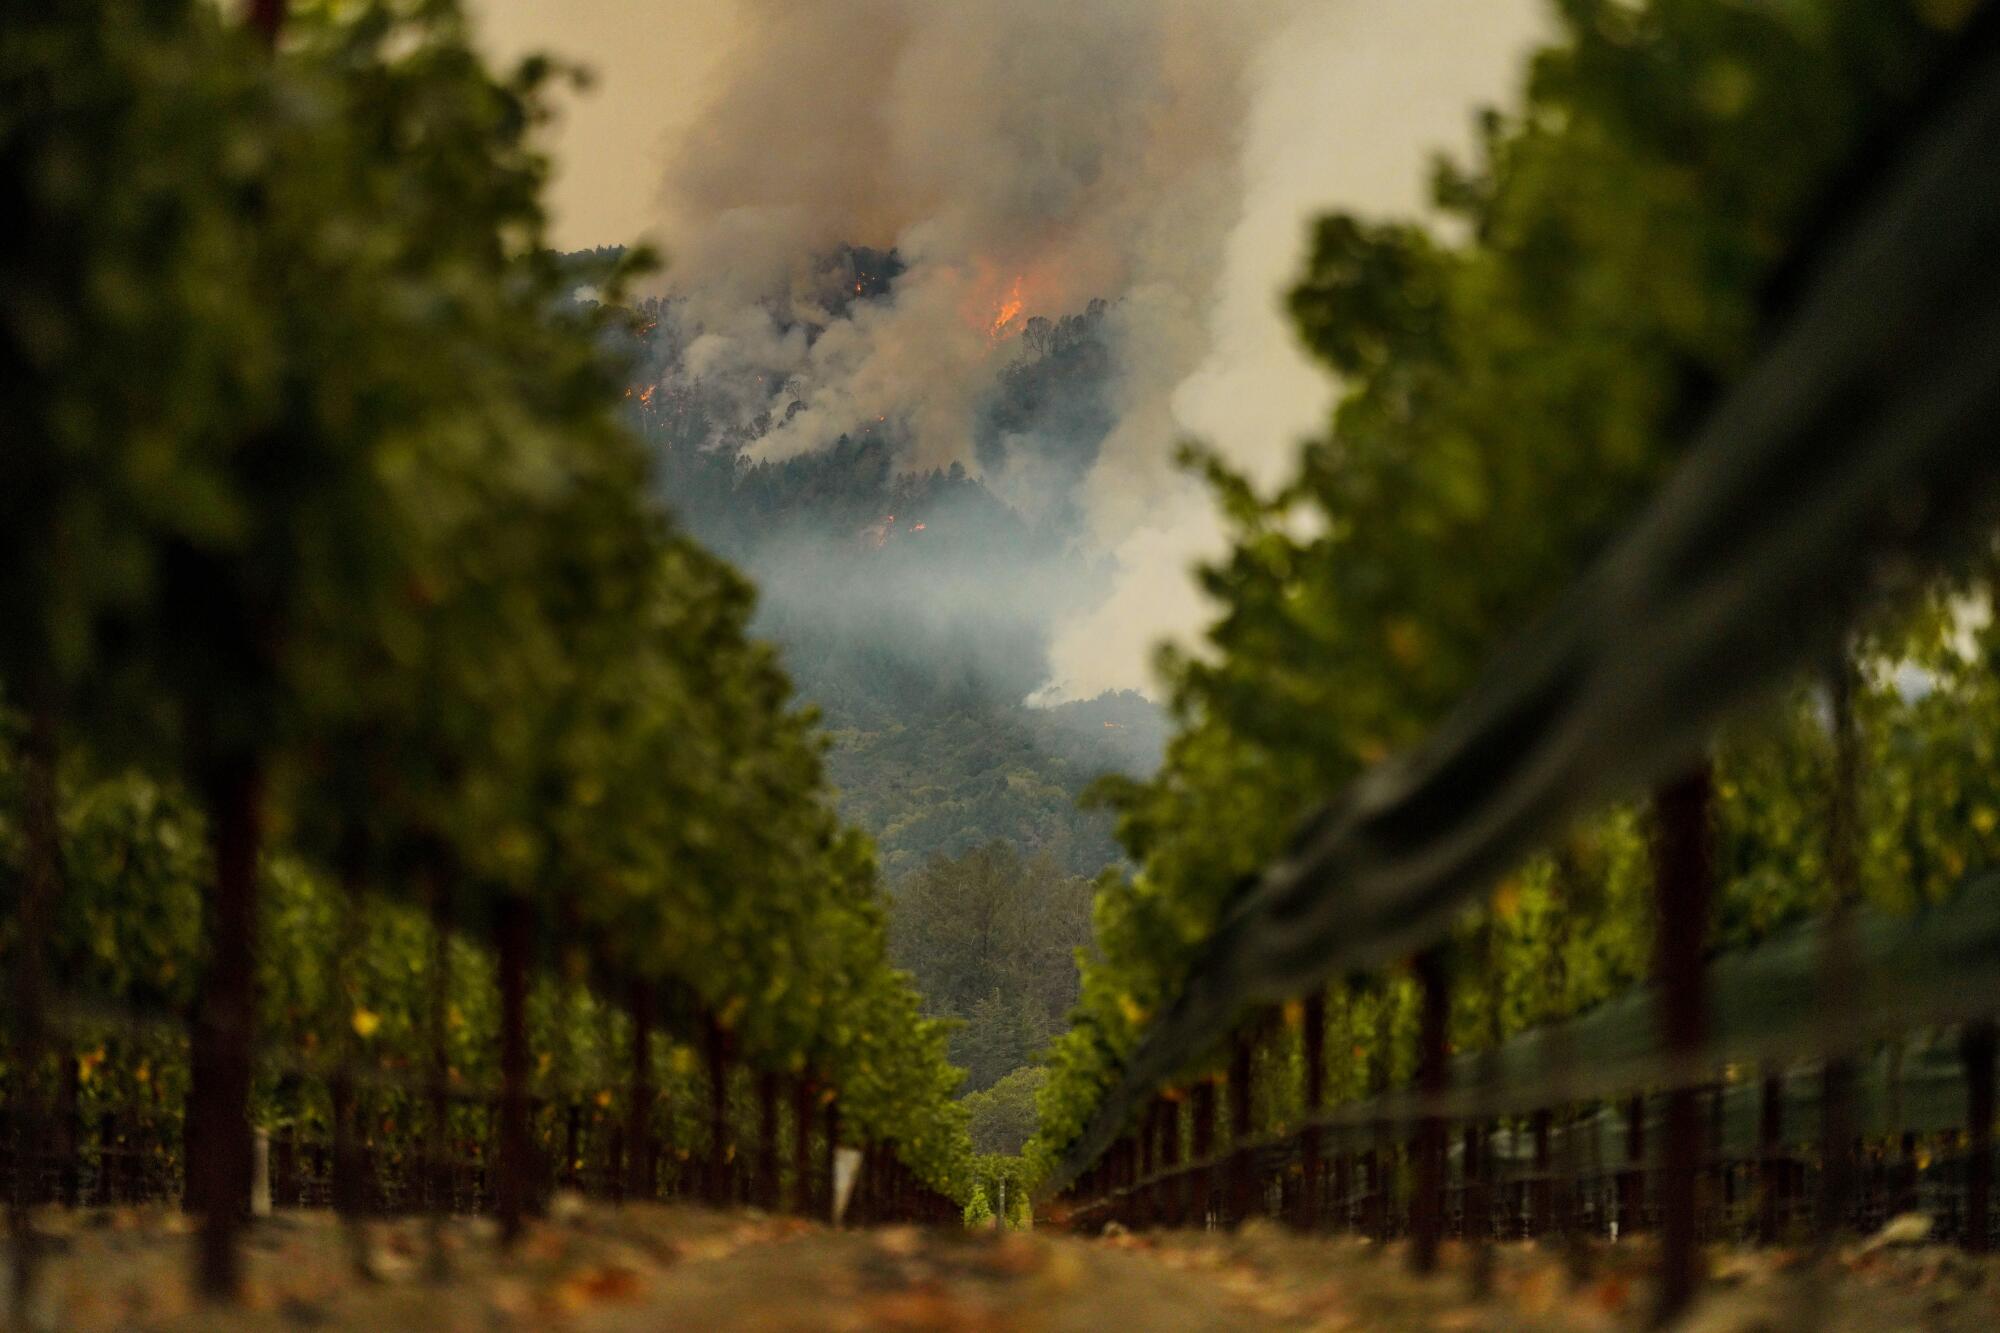 Fire burns on a hillside behind a row of grapes at a vineyard.